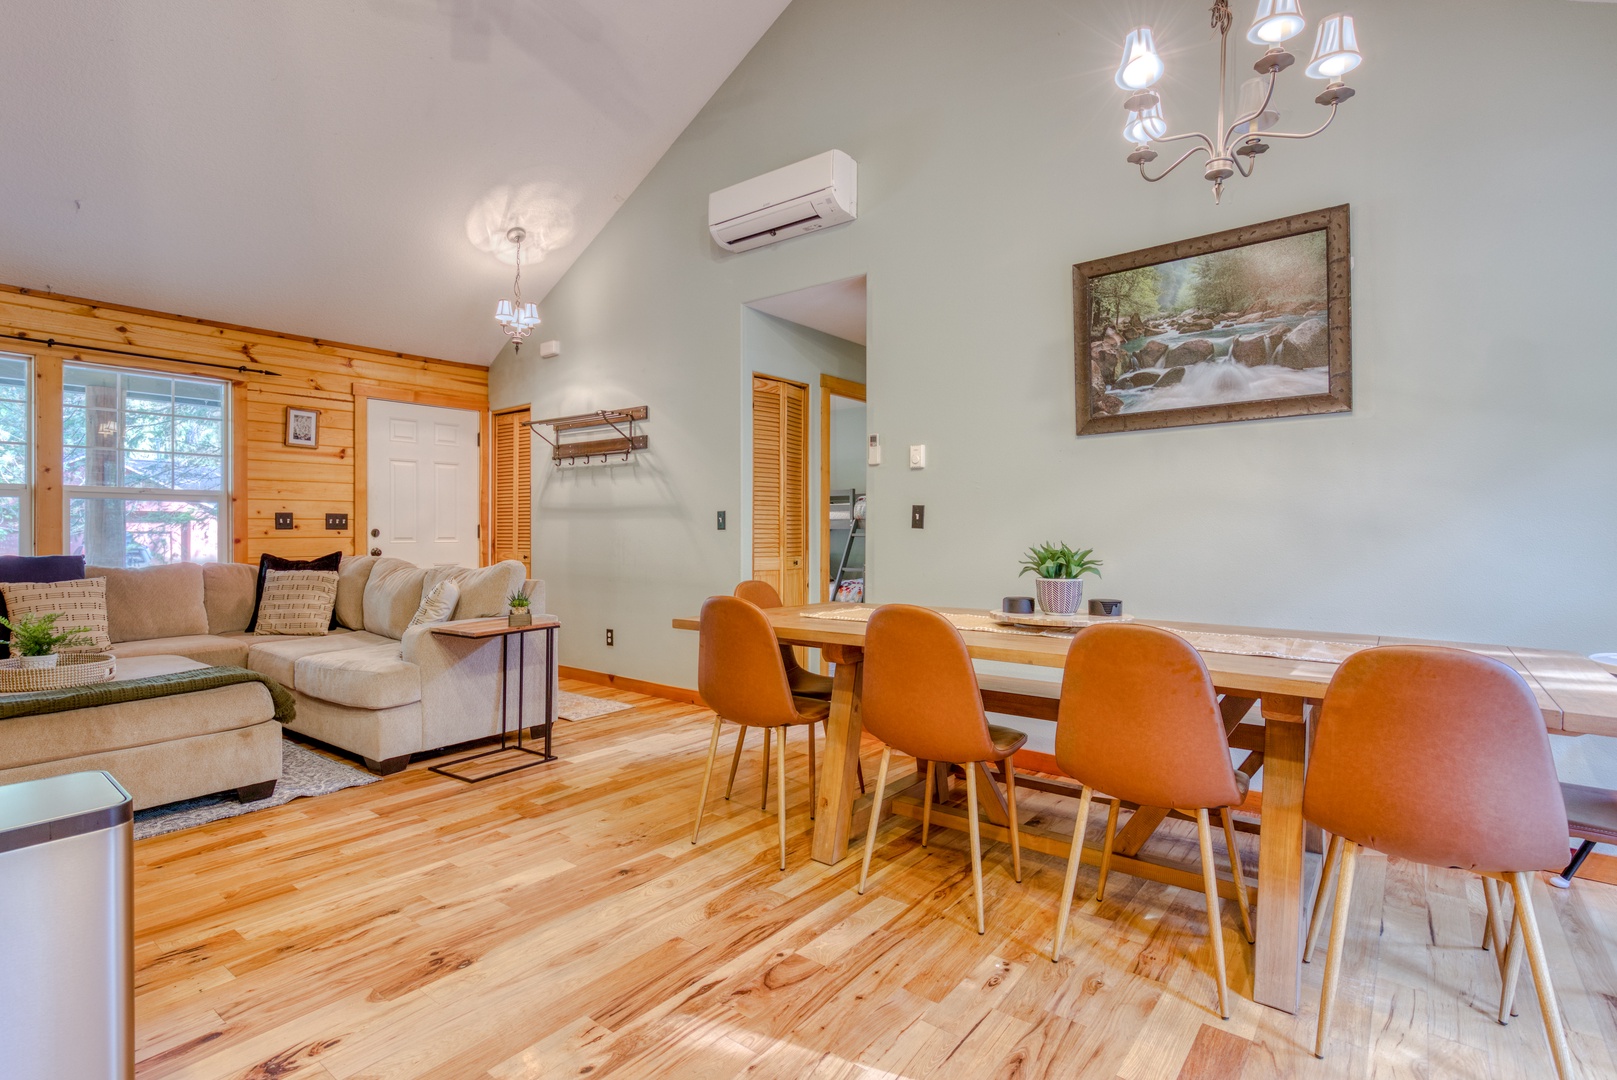 Brightwood Vacation Rentals, Riverside Retreat - Gather with loved ones for a dinner feast after a long day of fun